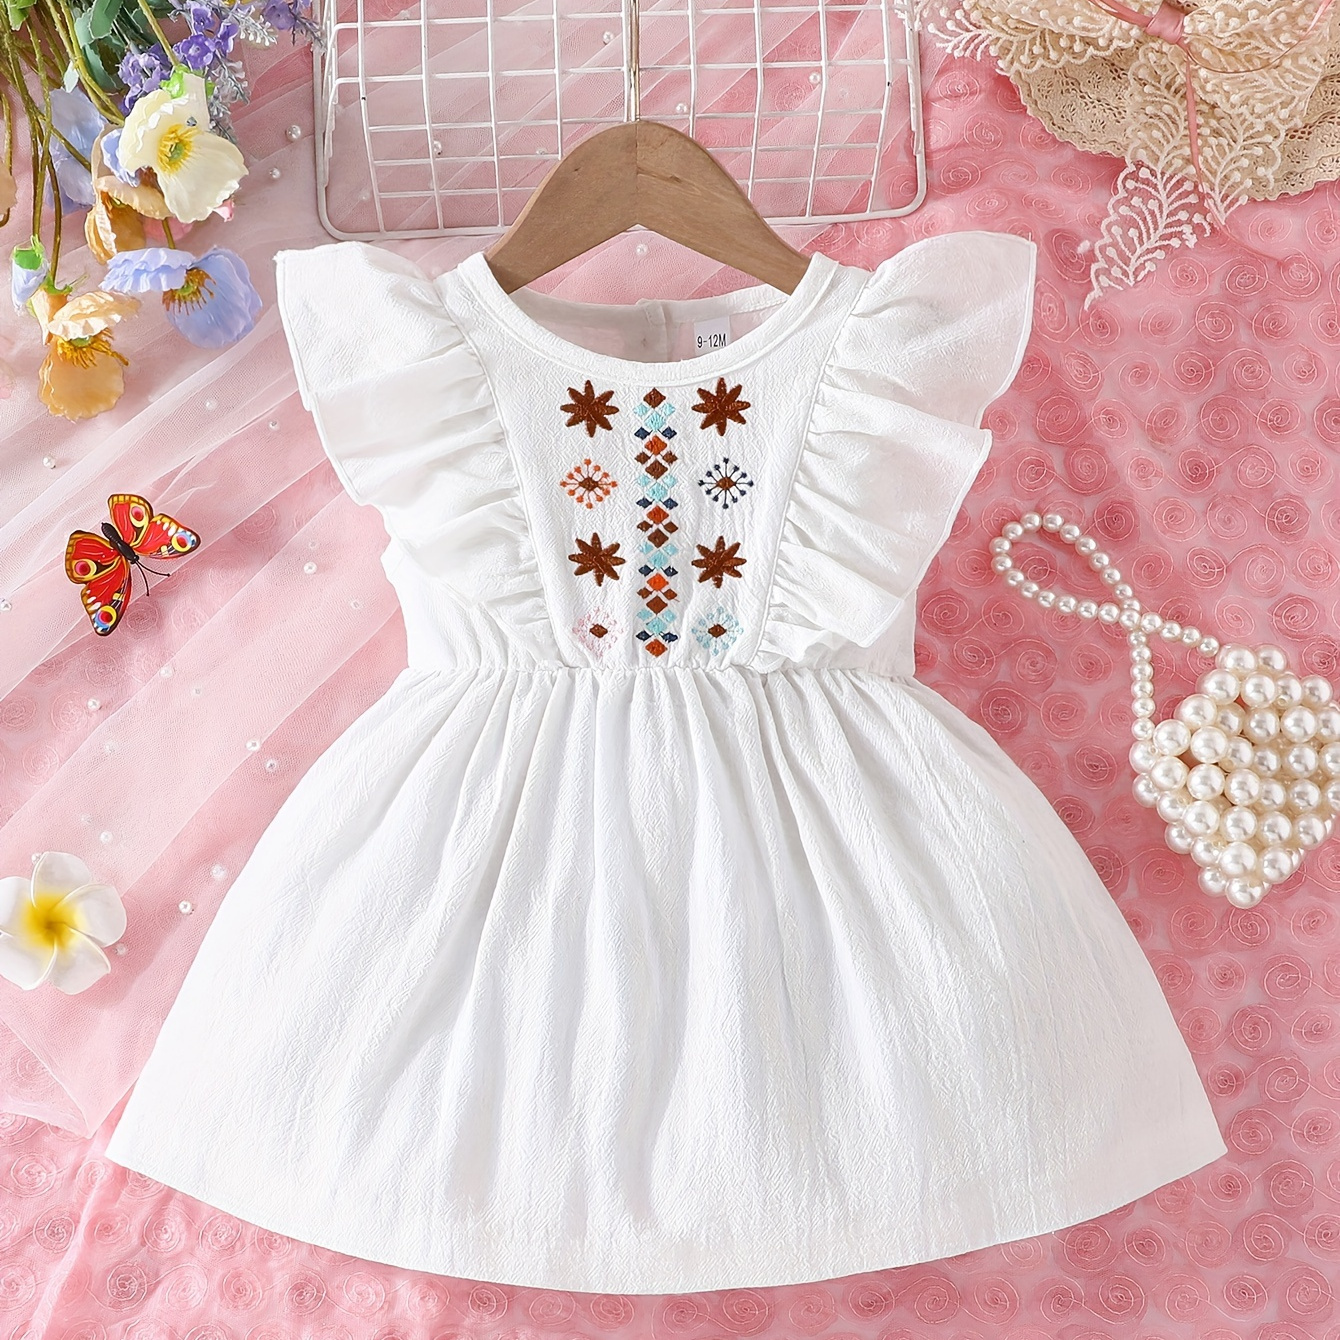 

Infant & Toddler's Ethnic Style Pattern Cotton Dress, Casual Cap Sleeve Dress, Baby Girl's Clothing For Summer